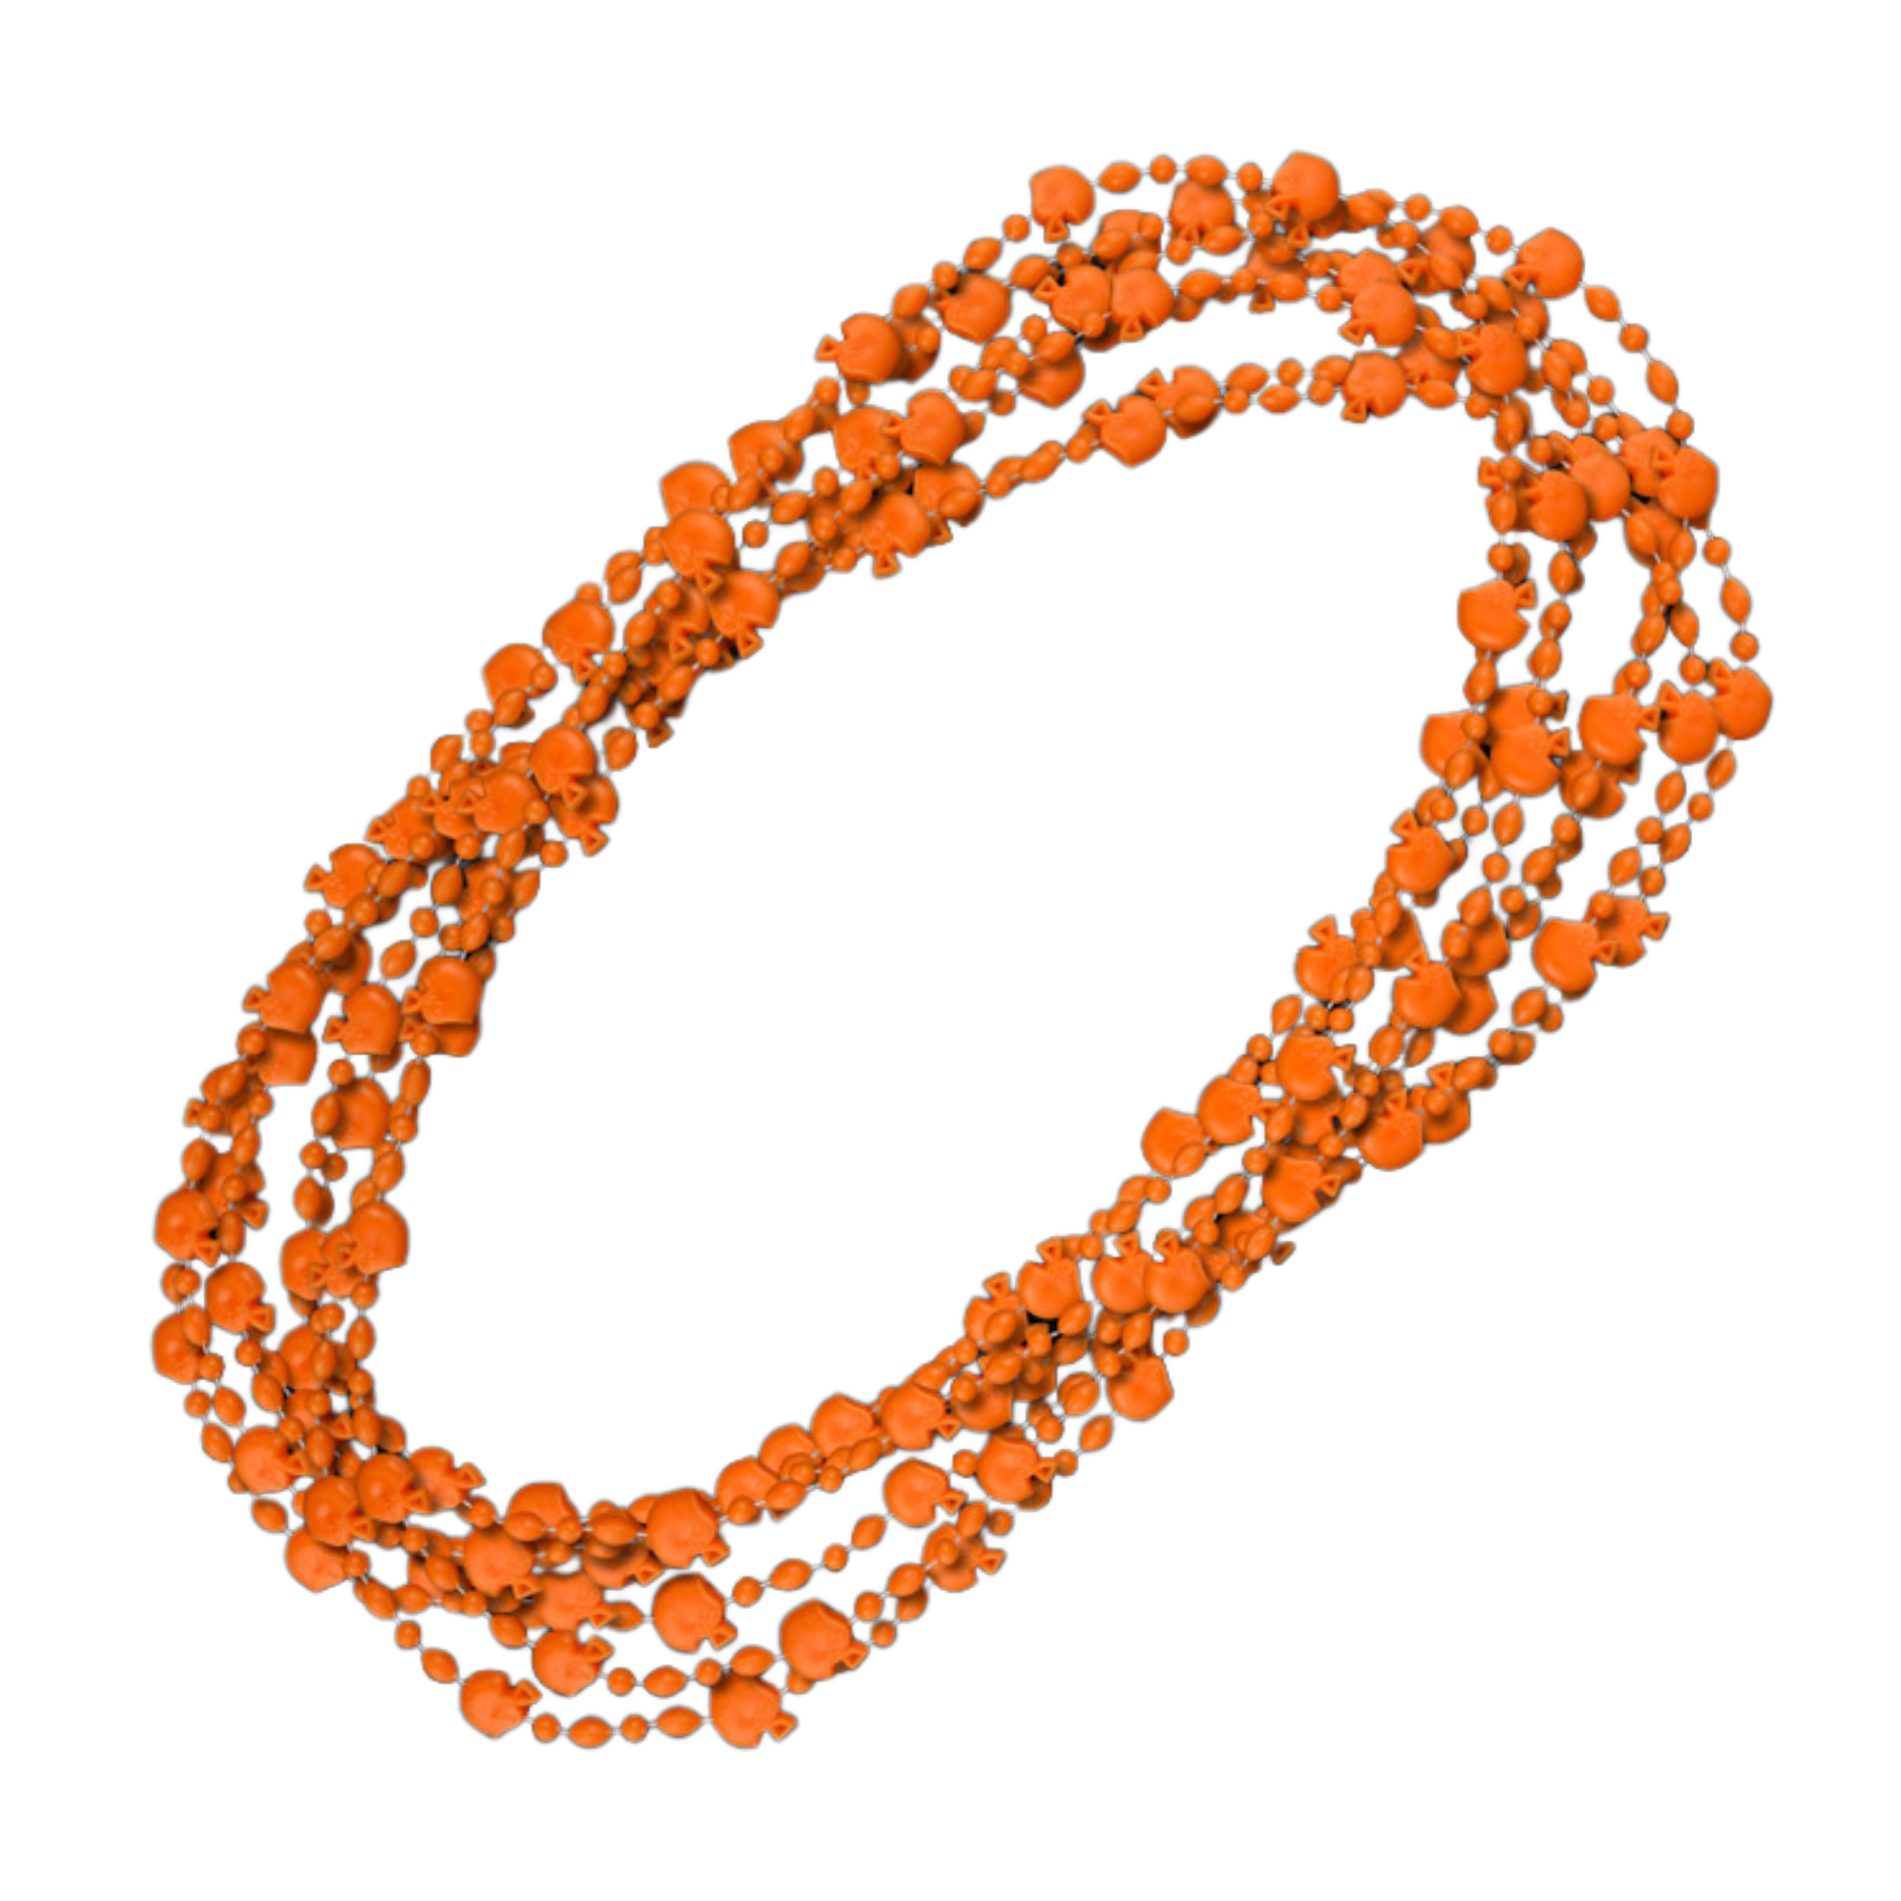 Football Helmet Bead Necklaces Non Metallic Orange Pack of 12 All Products 6